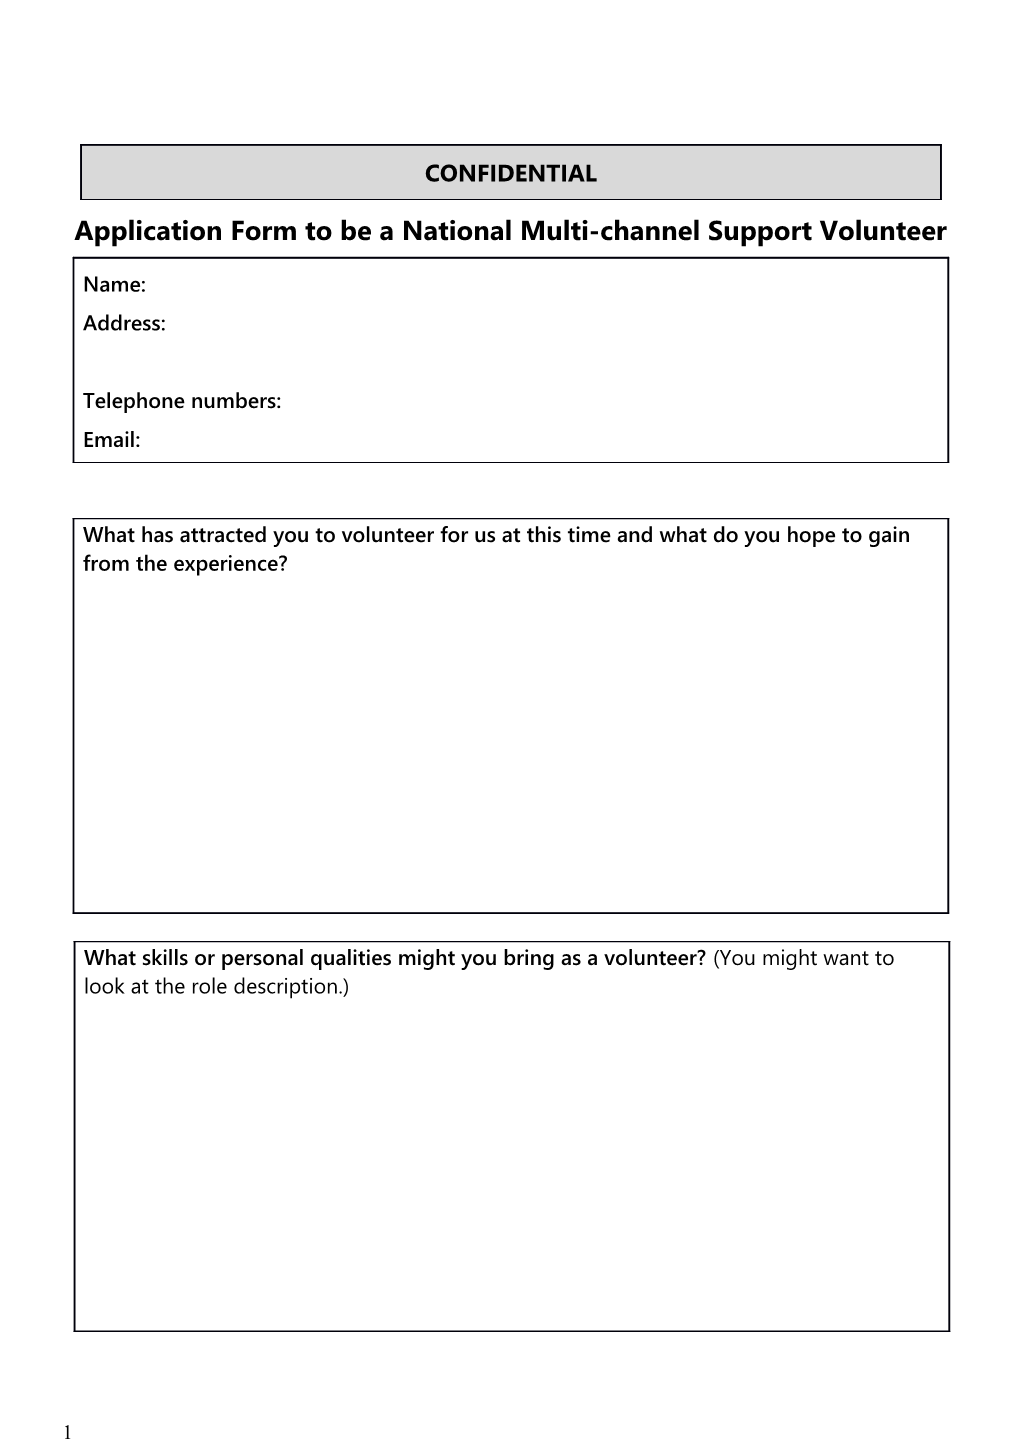 Application Form to Be a National Multi-Channel Support Volunteer